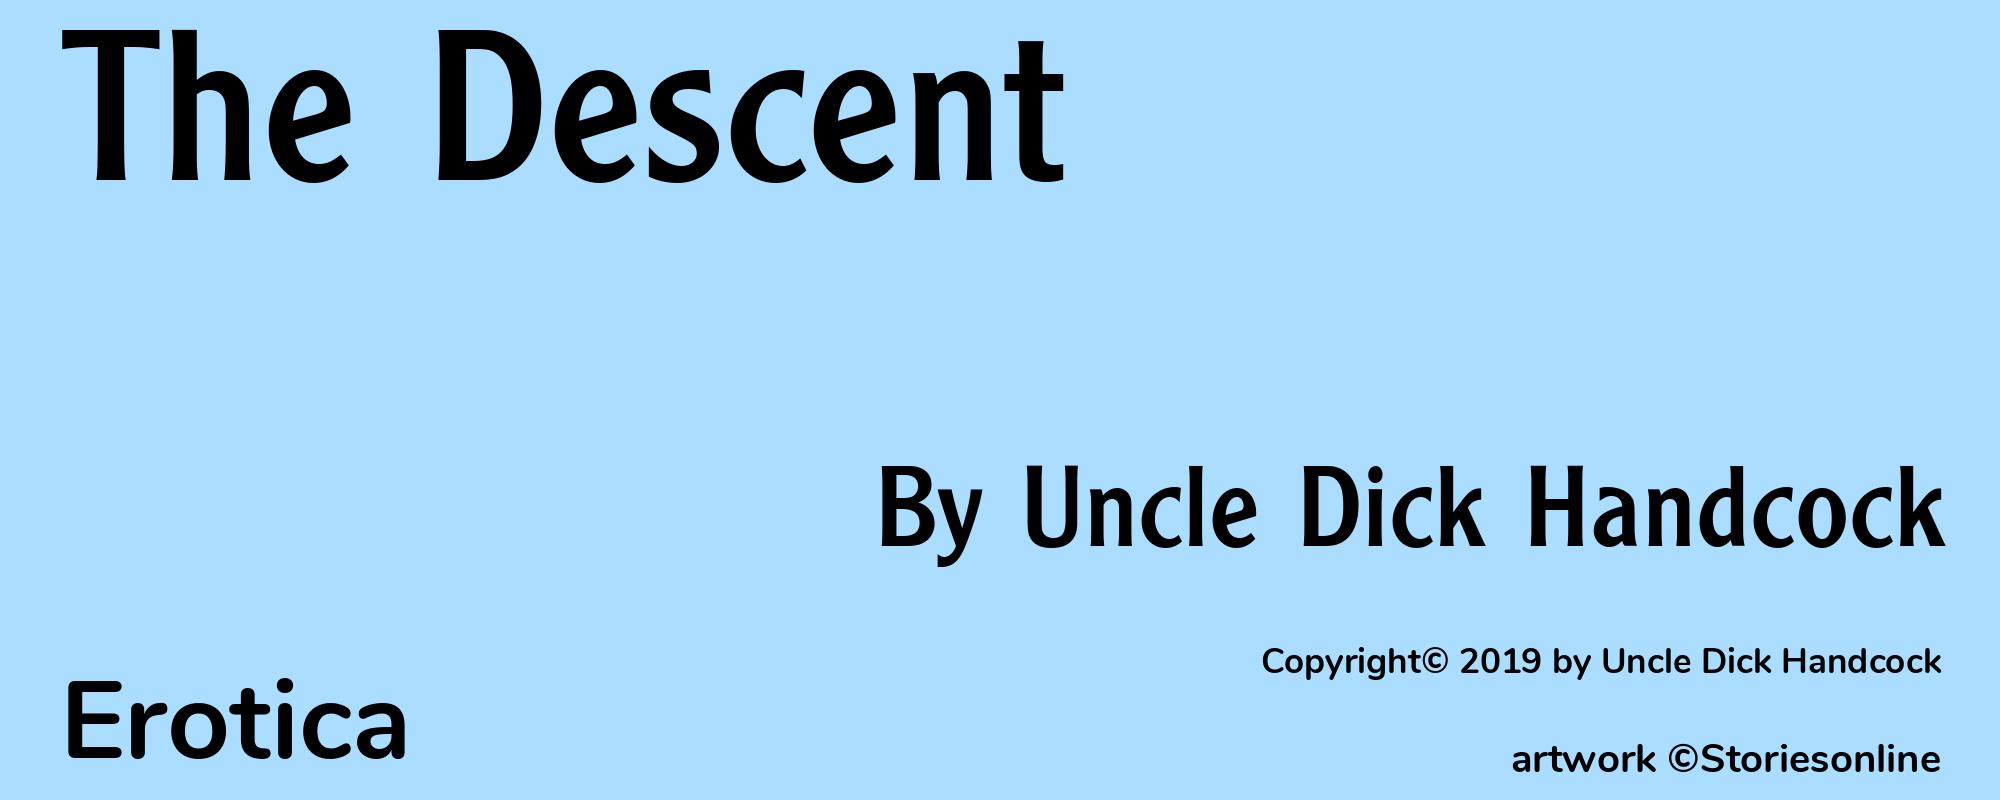 The Descent - Cover